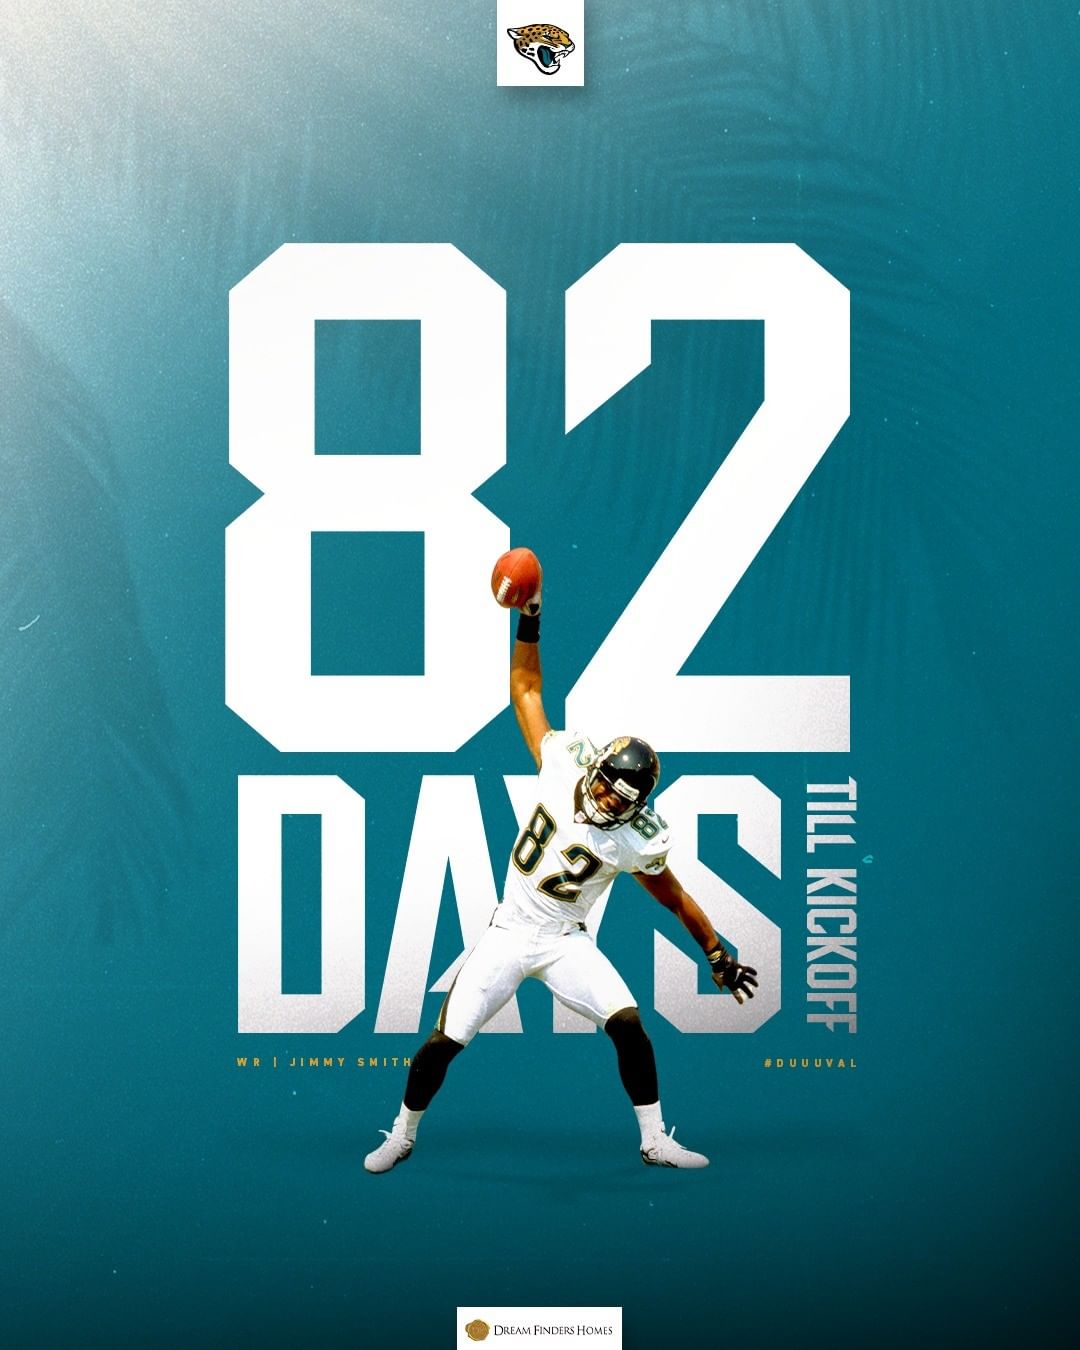 82 days, but who's counting?  @dreamfindershomes | #DUUUVAL...